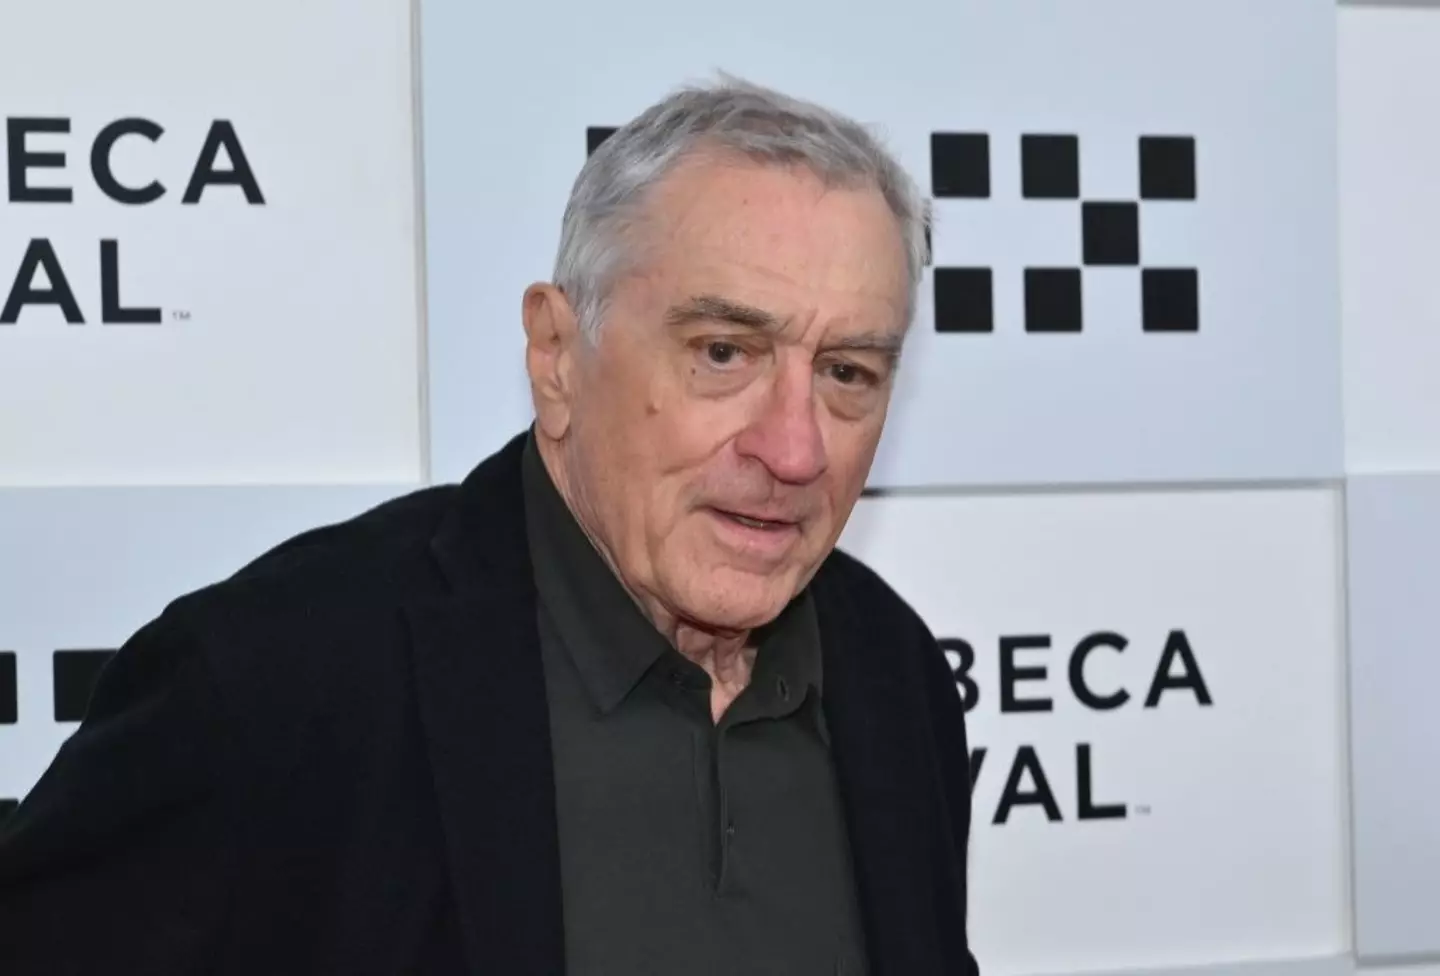 Robert De Niro said it 'feels great' to become a father again.